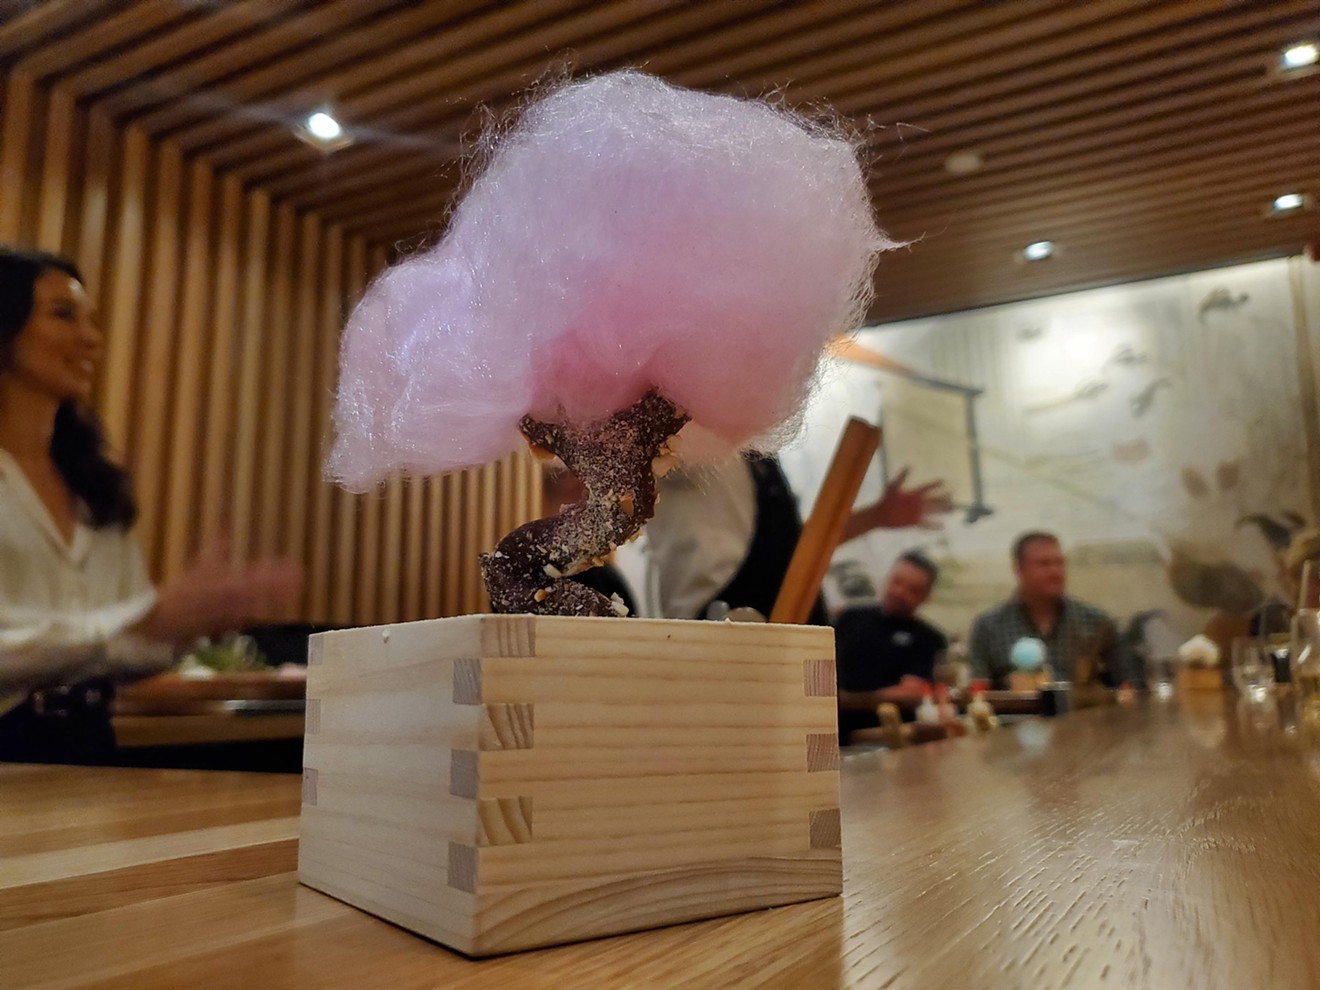 The grand finale at Ukiyo is this cotton candy tree.